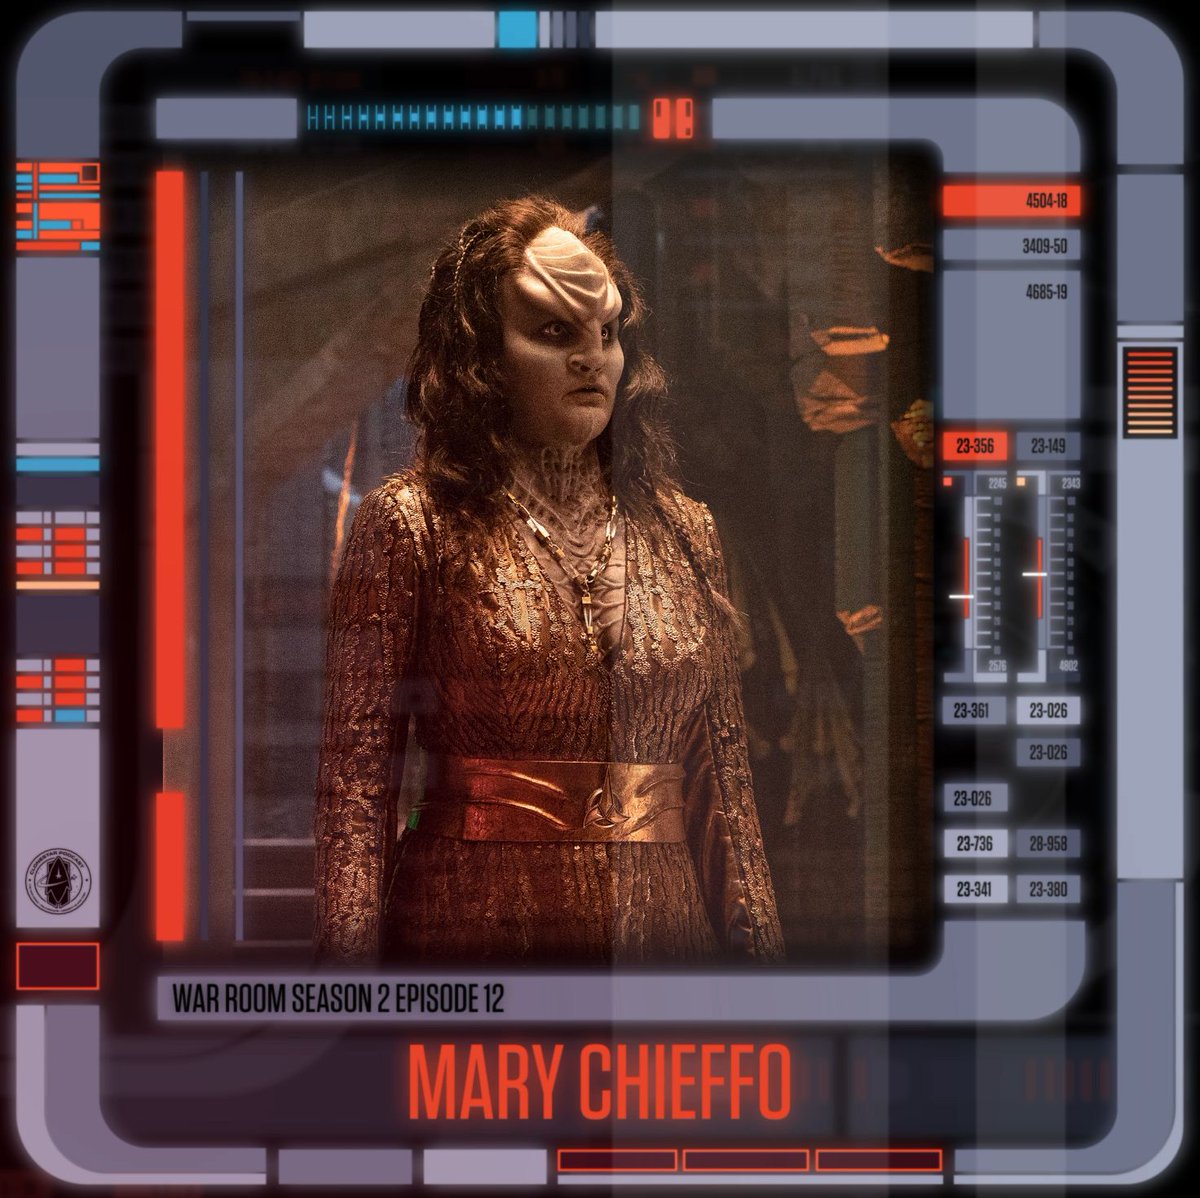 🚨WEDNESDAY'S EPISODE🚨

ALL GLORY TO THE KLINGON EMPIRE!

Our guest this week, in a blockbuster episode, is the magnificent Mary Chieffo (@marythechief) 🥳🥳

Join us from 4 GMT on Wednesday 🖖

#StarTrekDiscovery 
#StarTrek
#Klingon
#ByFansForFans